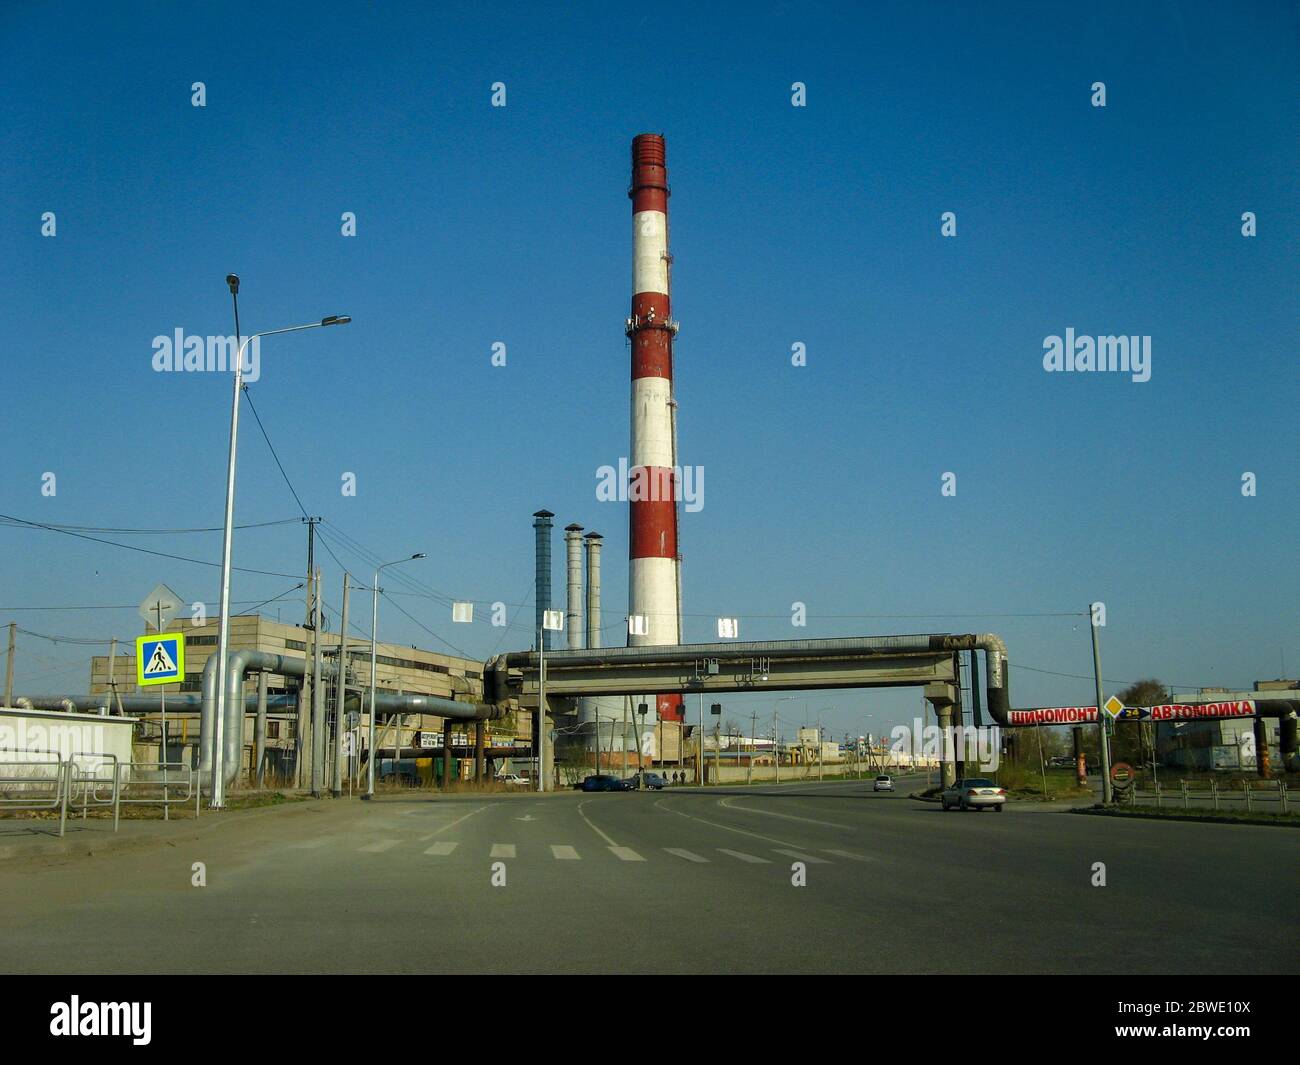 chelyabinsk, russia 06 06 2019:  Chelyabinsk Central Hot Water Chimney. Russian chimney with blue sky background. Stock Photo